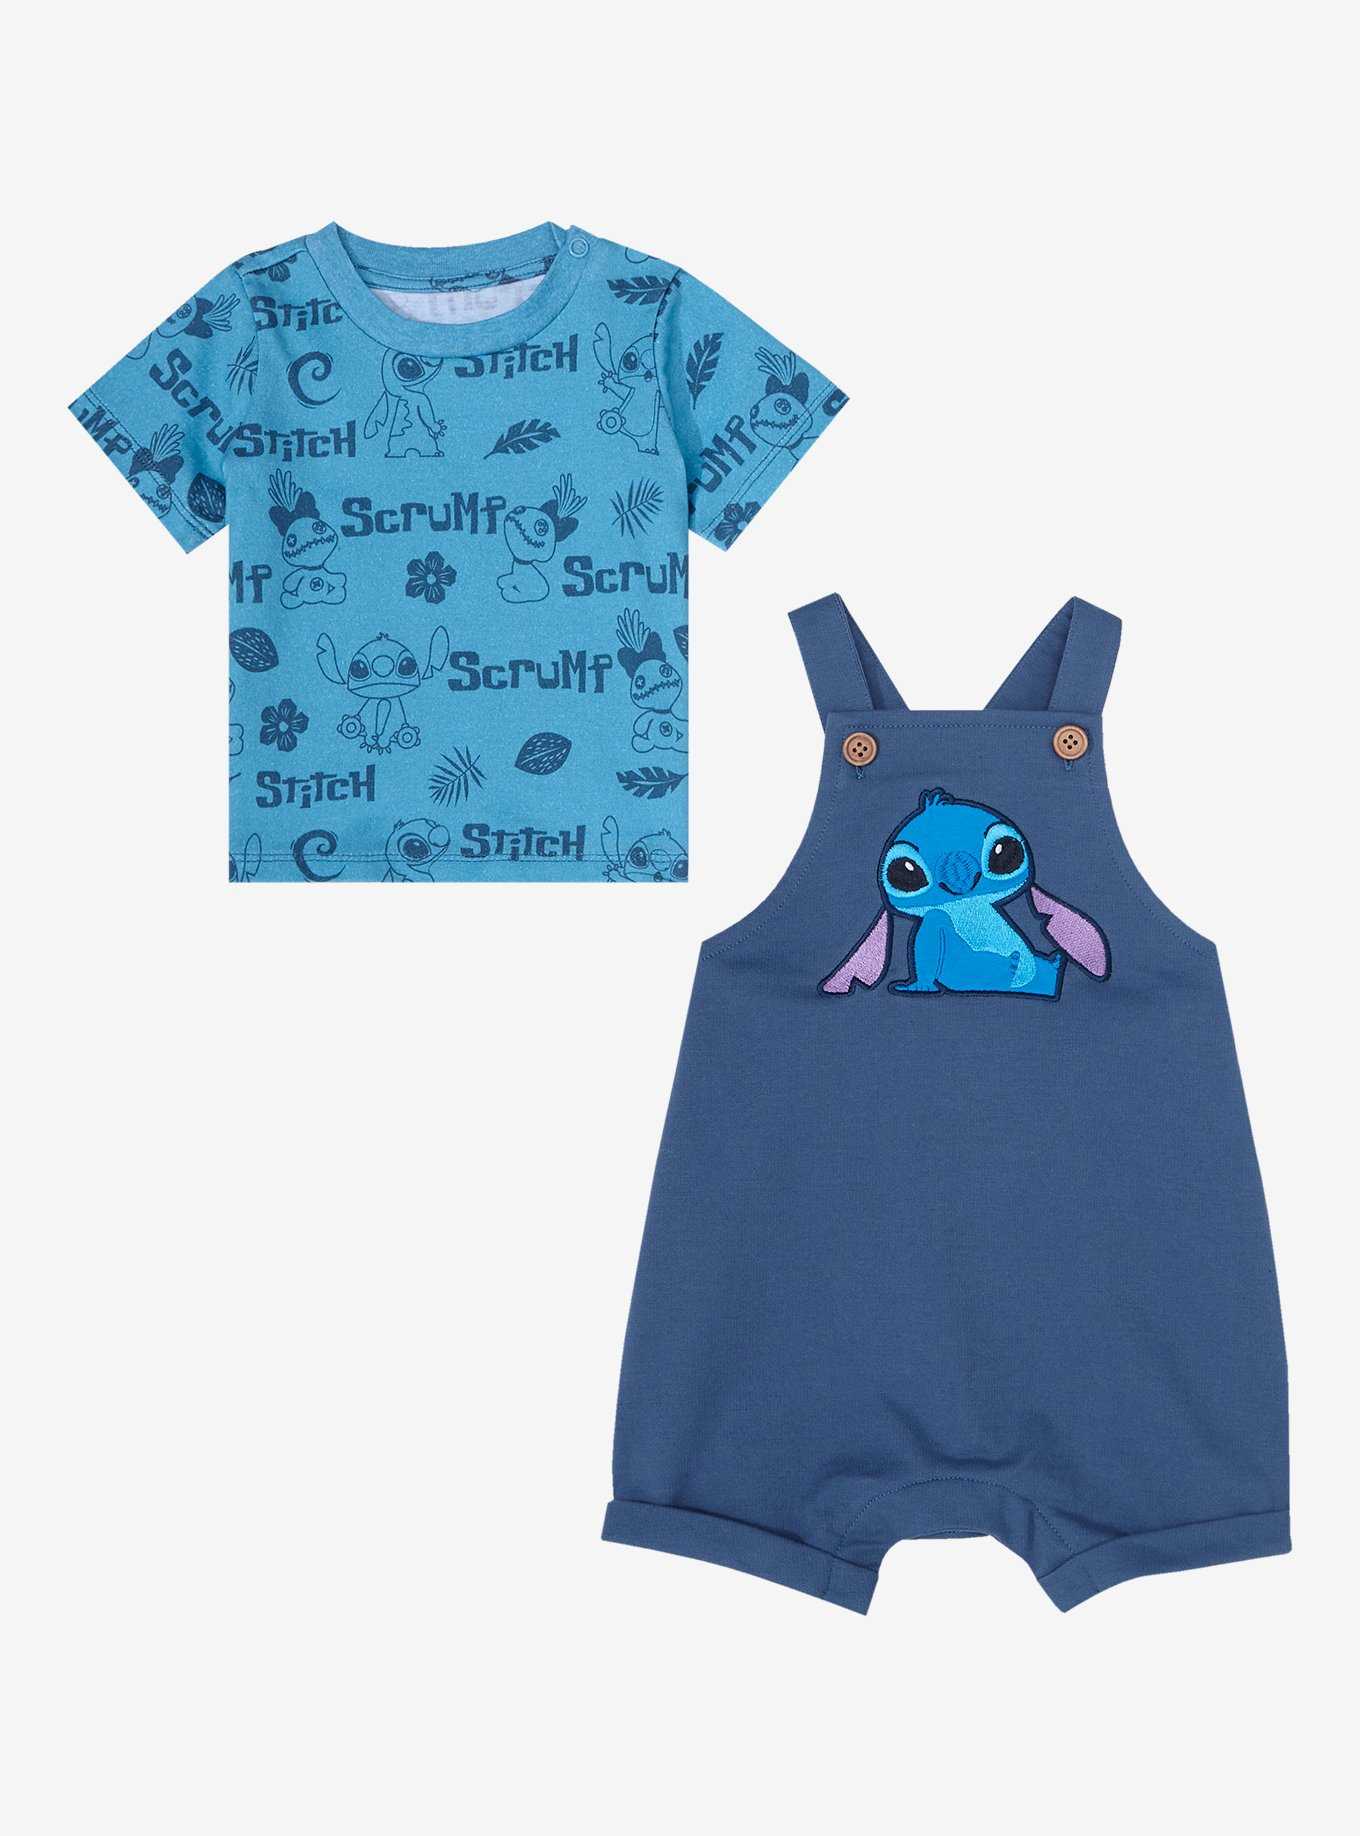 Lilo And Stitch Print Tracksuit Kids Boys Girls Outfits Long